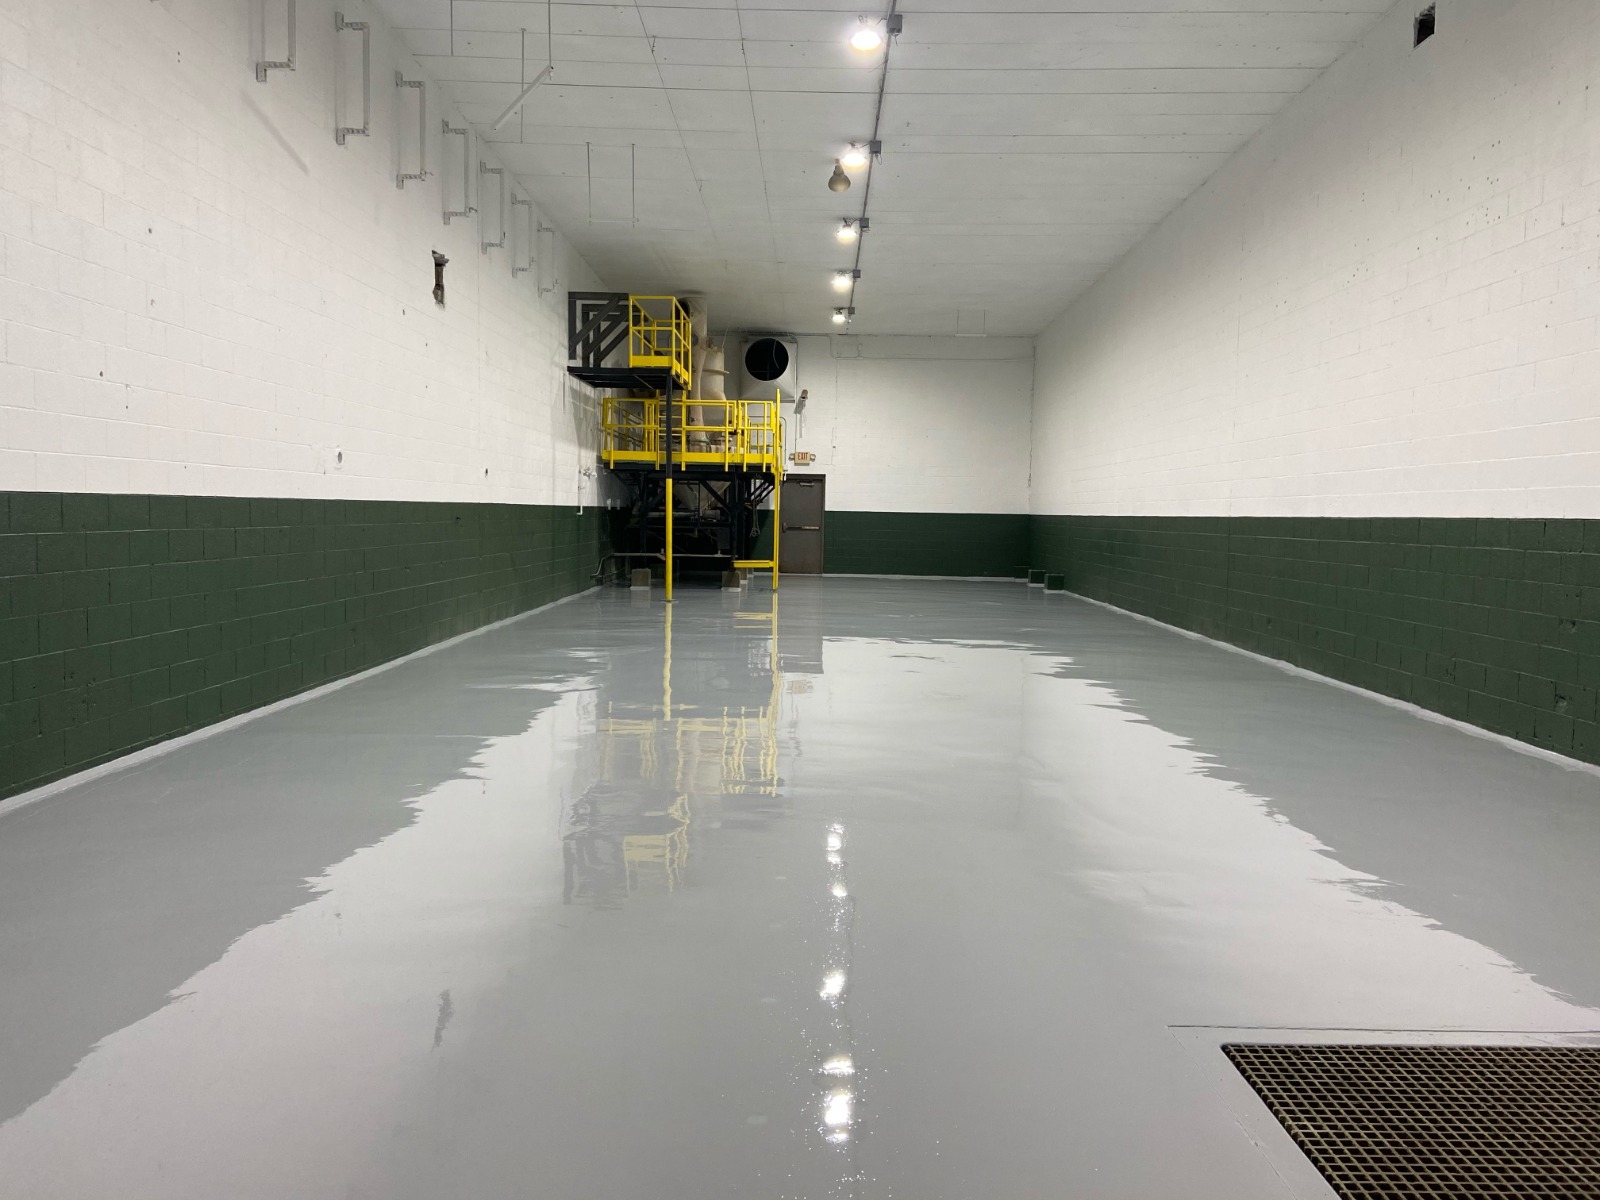 Completely Rejuvenated Concrete Floors in Just Two Days